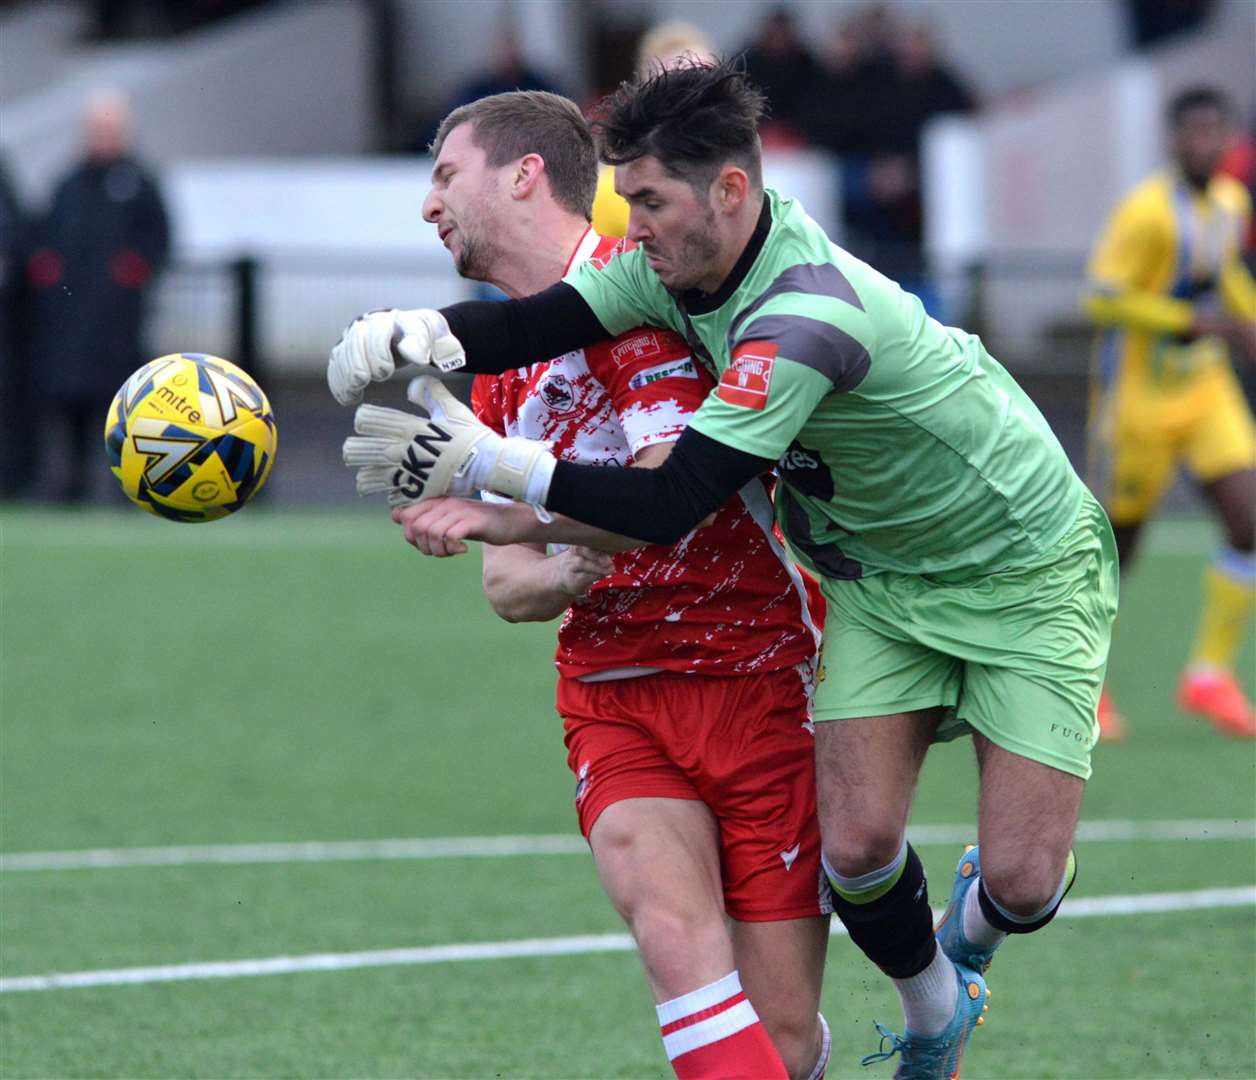 Harley Earle beats Sittingbourne old boy Kane Rowland to the ball. Picture: Randolph File